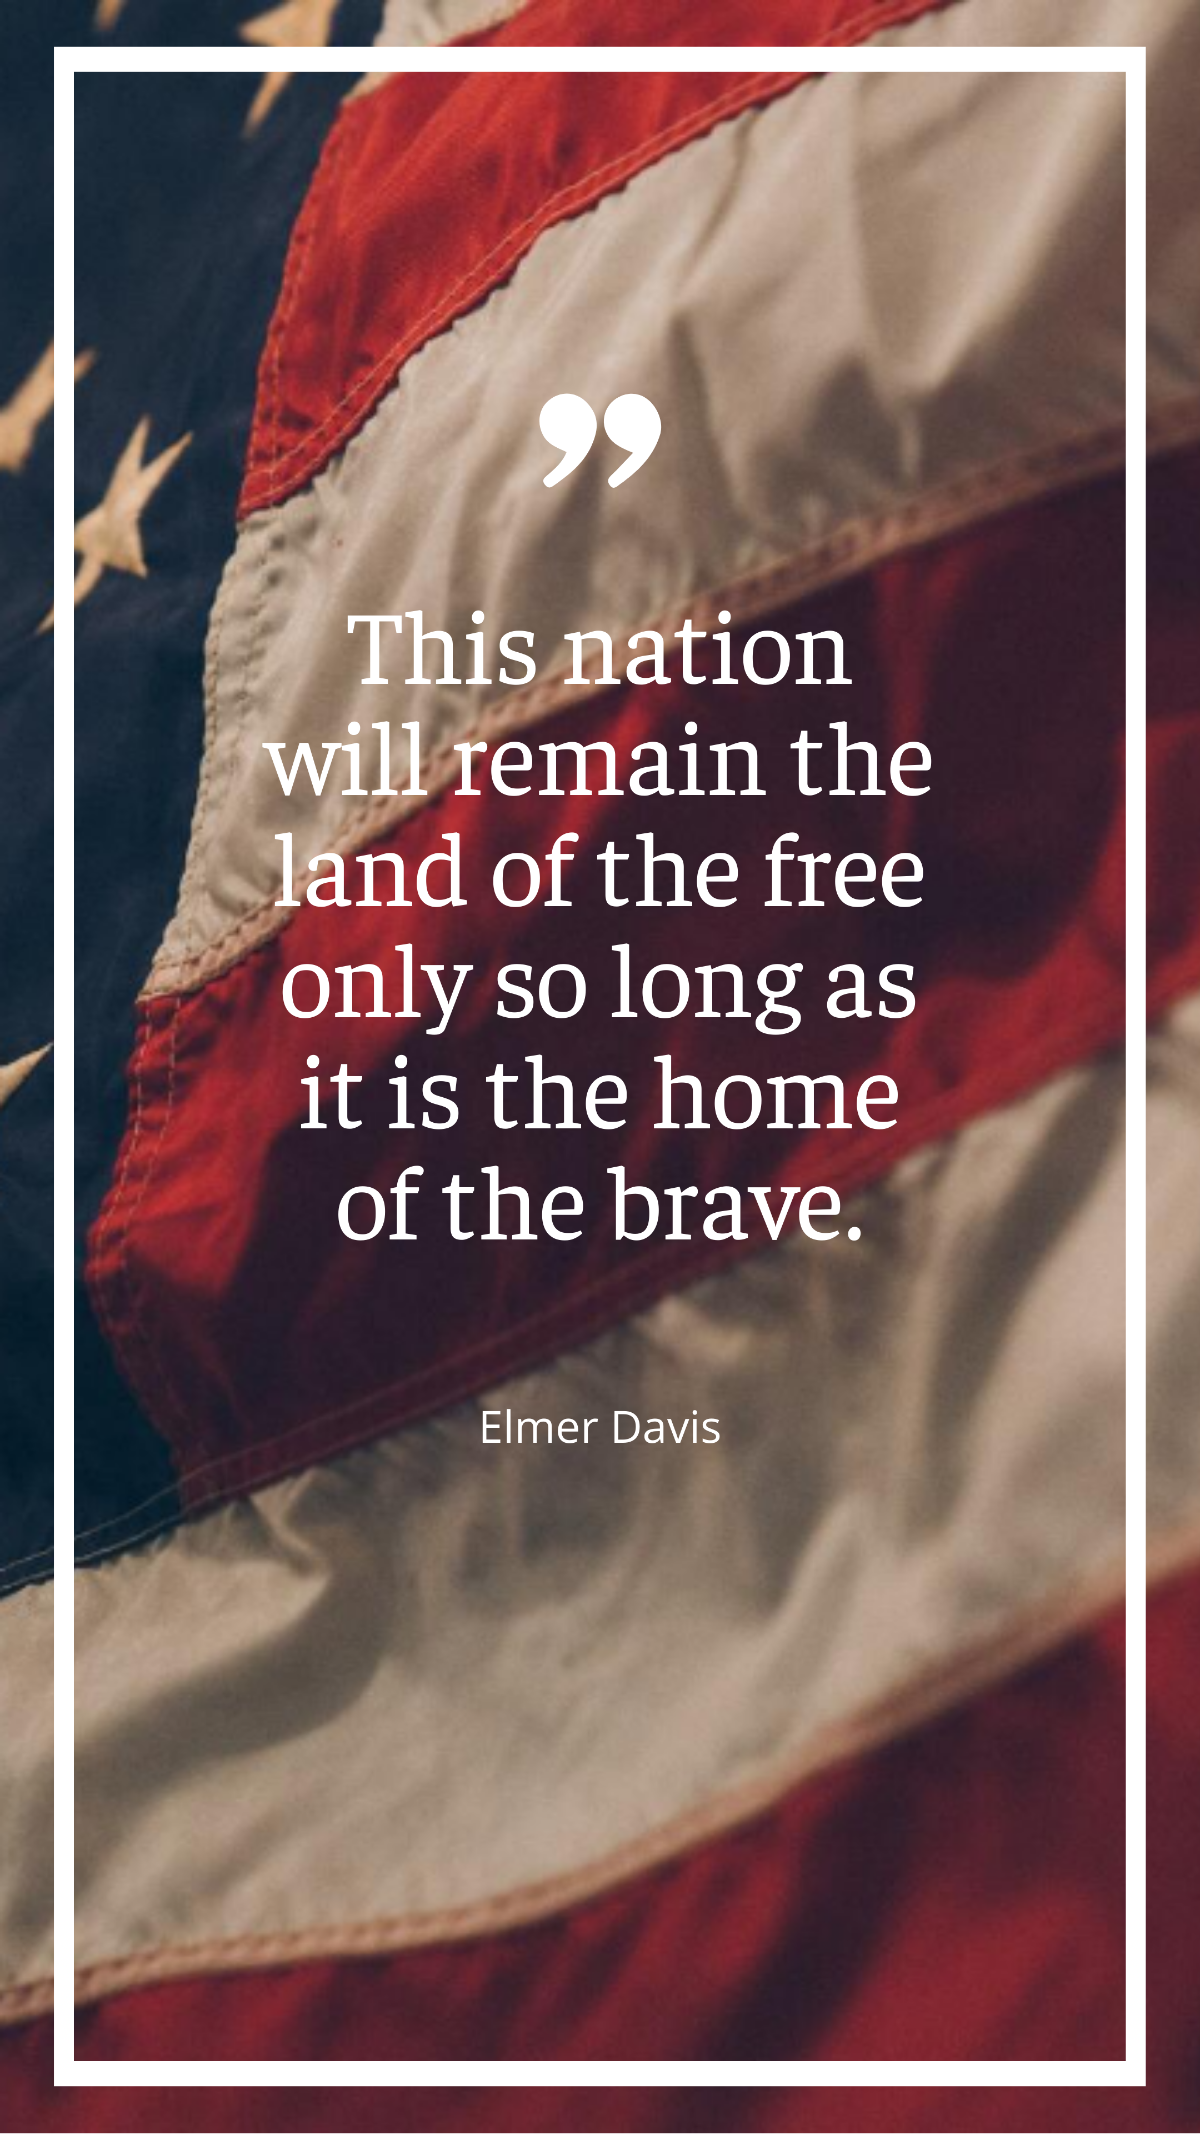 Elmer Davis - “This nation will remain the land of the only so long as it is the home of the brave.” Template